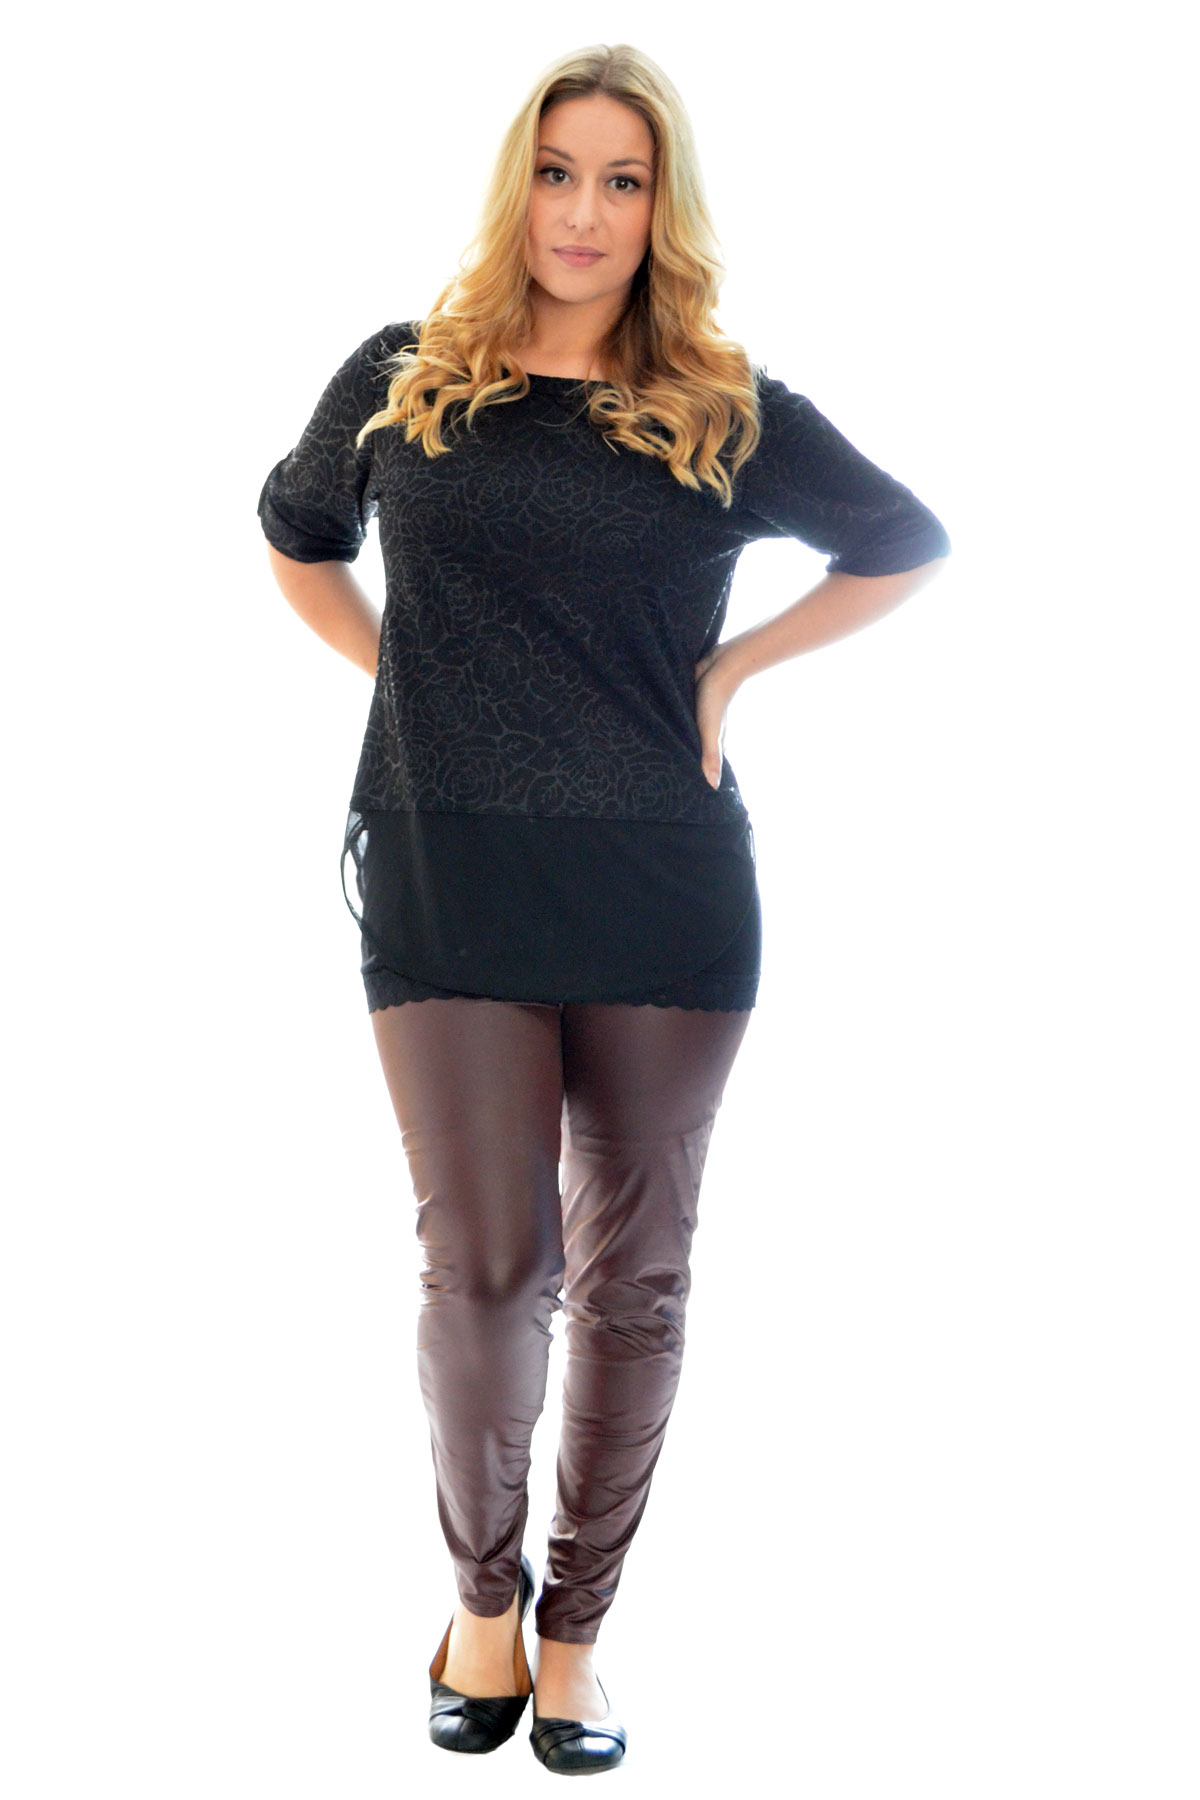 Wet Look Leggings Outfit Plus Size